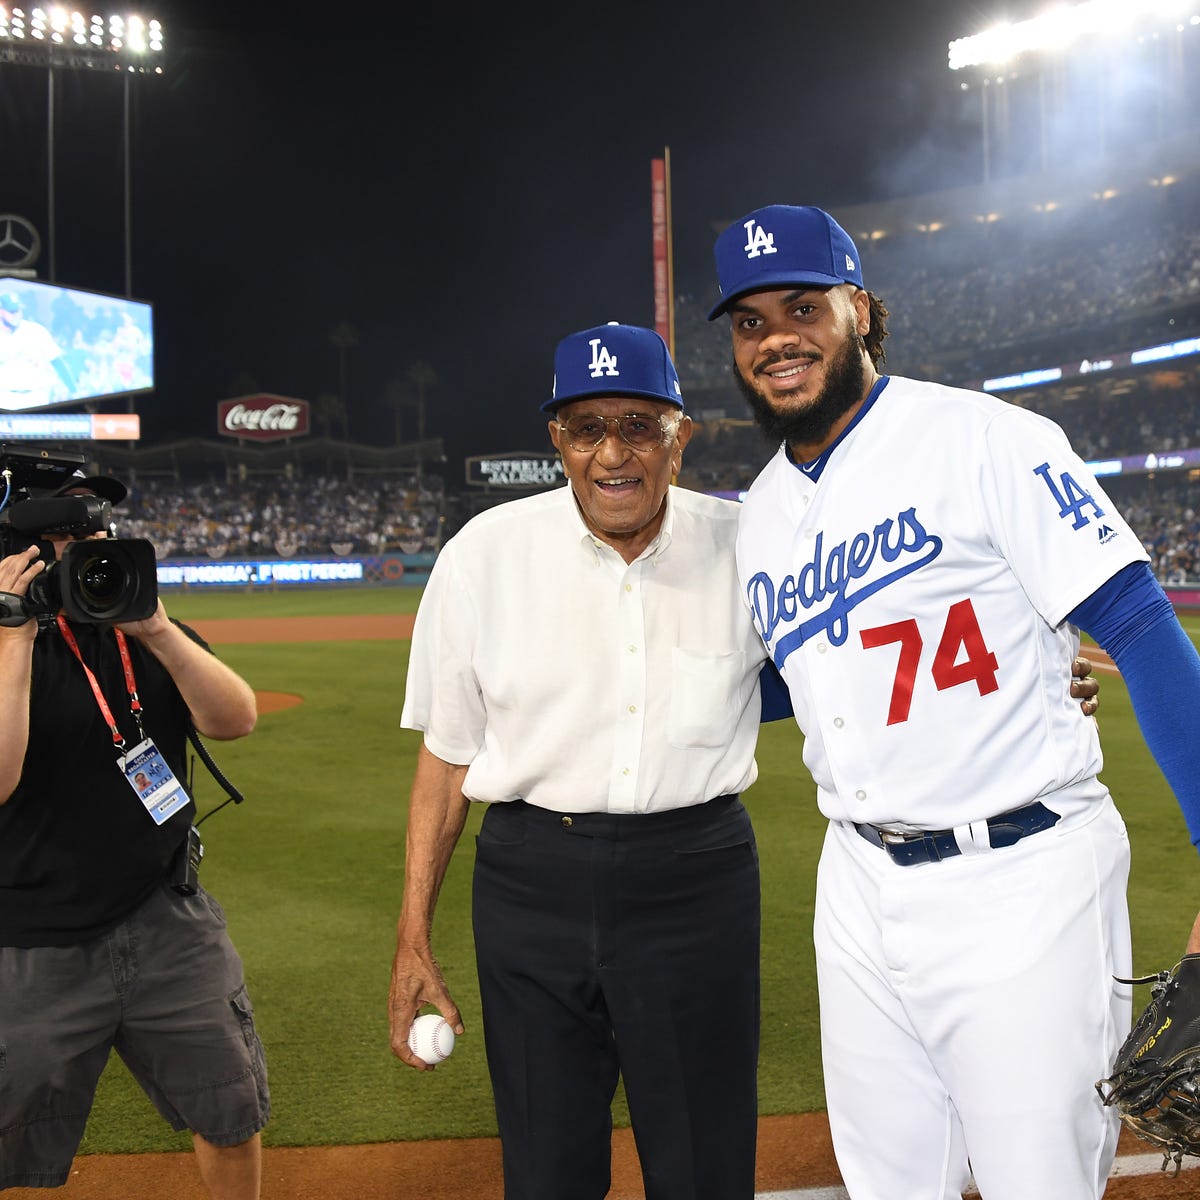 Dodgers to wear uniform patch to honor Don Newcombe, by Rowan Kavner